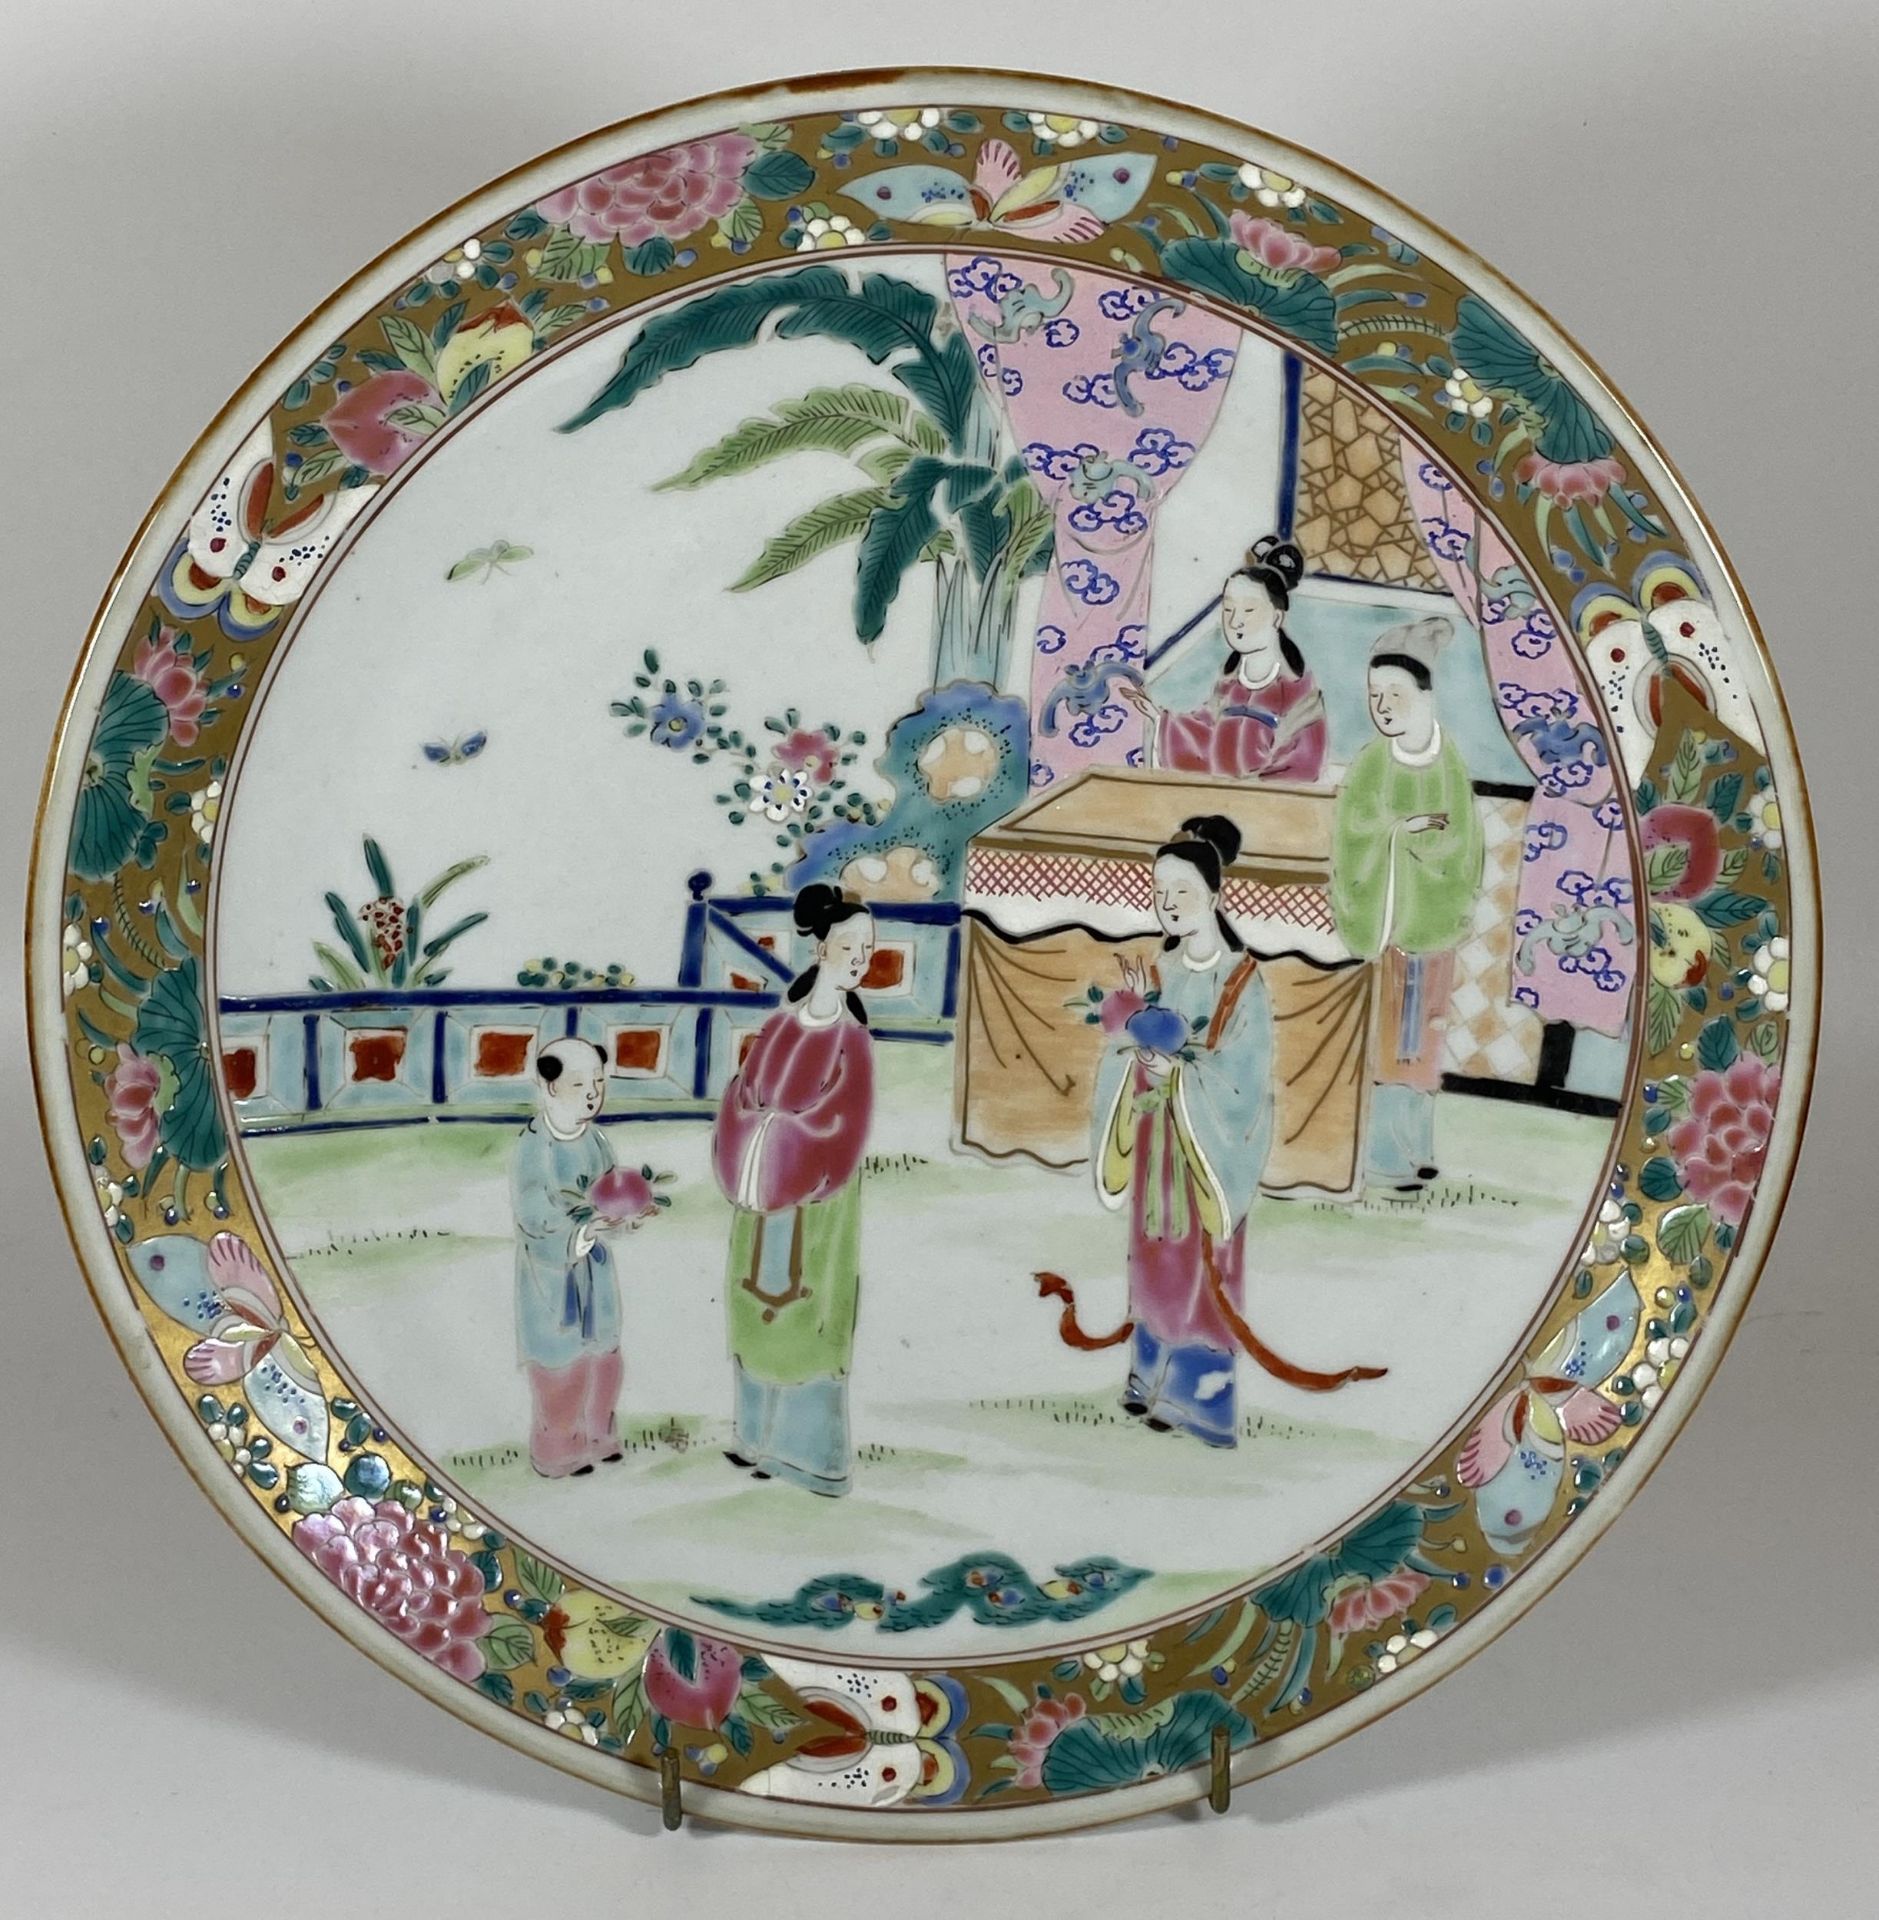 A LARGE CHINESE FAMILLE ROSE PORCELAIN CHARGER WITH FIGURAL DESIGN, SIGNED TO BASE, DIAMETER 31CM